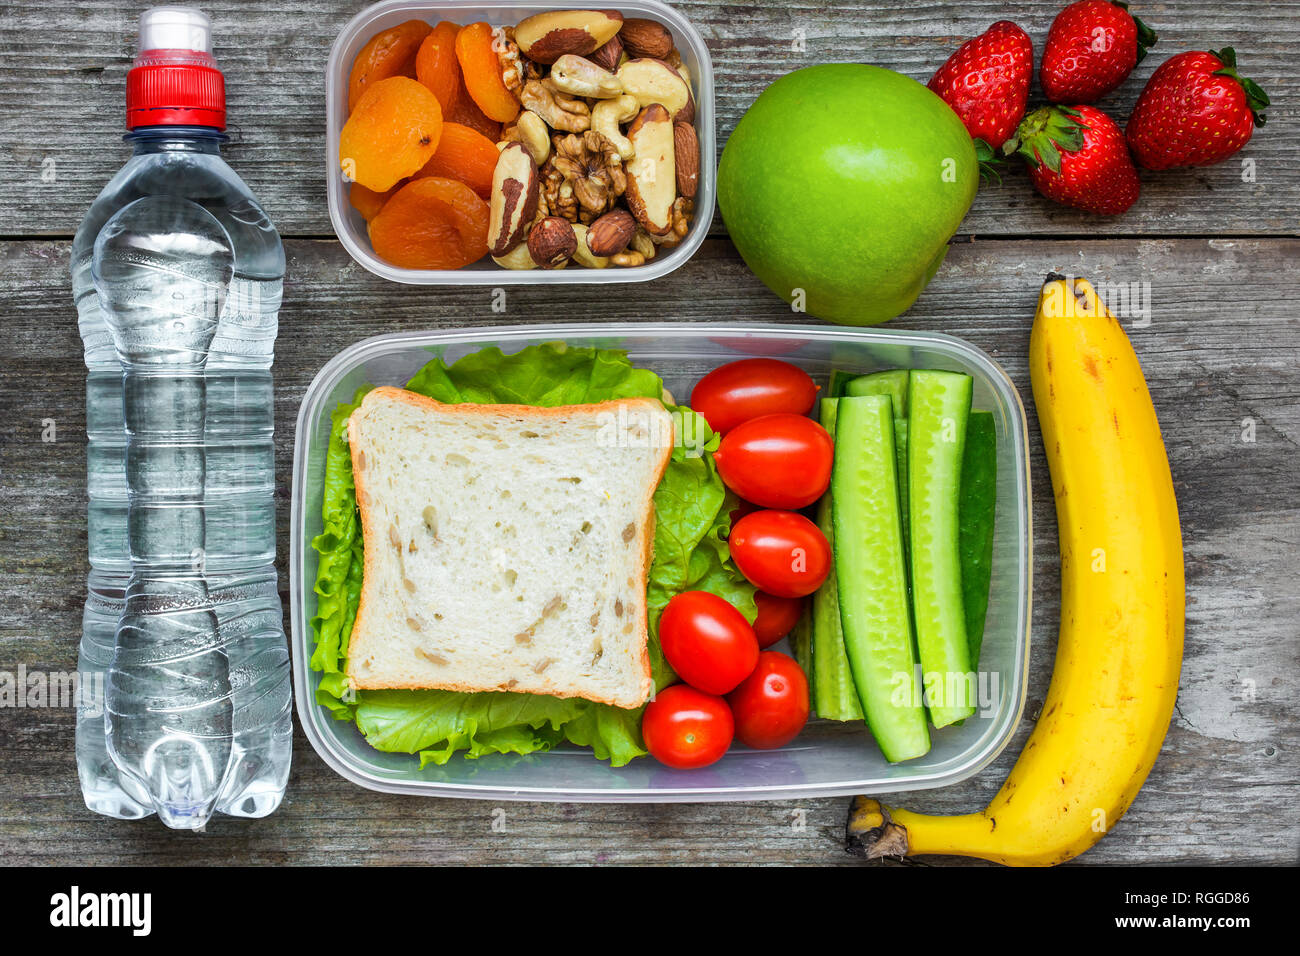 https://c8.alamy.com/comp/RGGD86/healthy-lunch-boxes-with-sandwich-and-fresh-vegetables-bottle-of-water-nuts-and-fruits-on-rustic-wooden-background-top-view-RGGD86.jpg